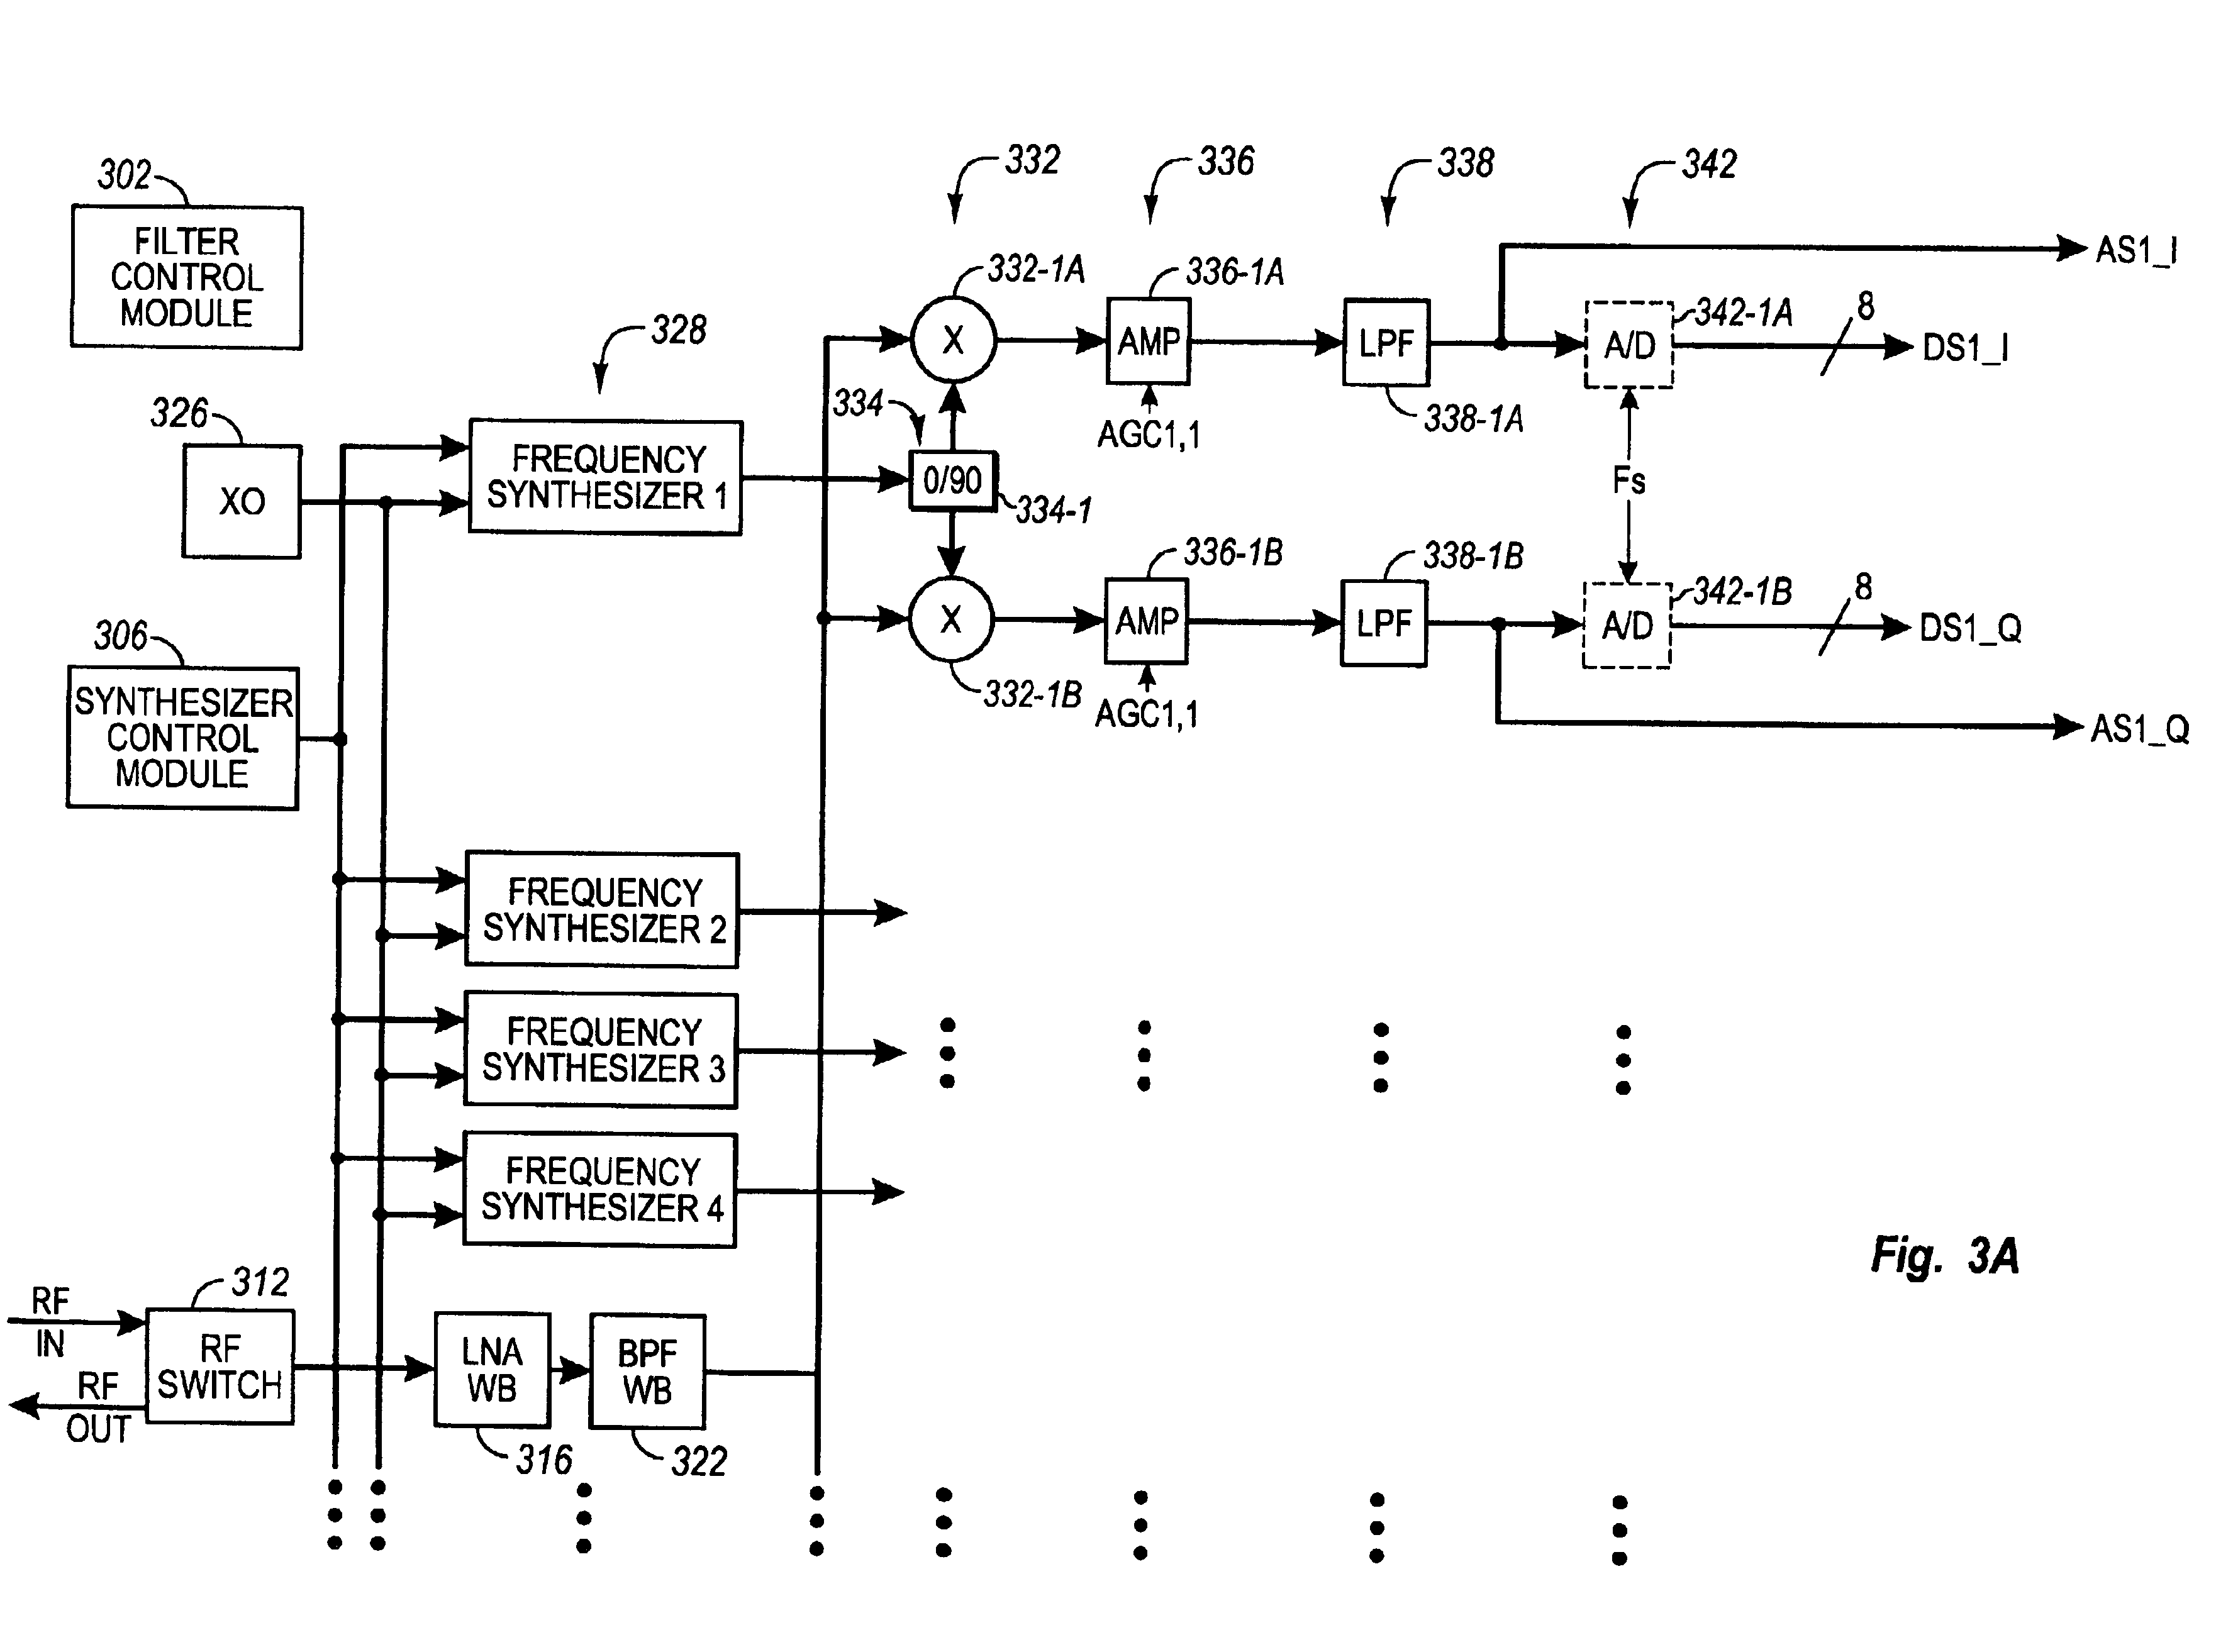 Simultaneous tuning of multiple channels using intermediate frequency sub-sampling